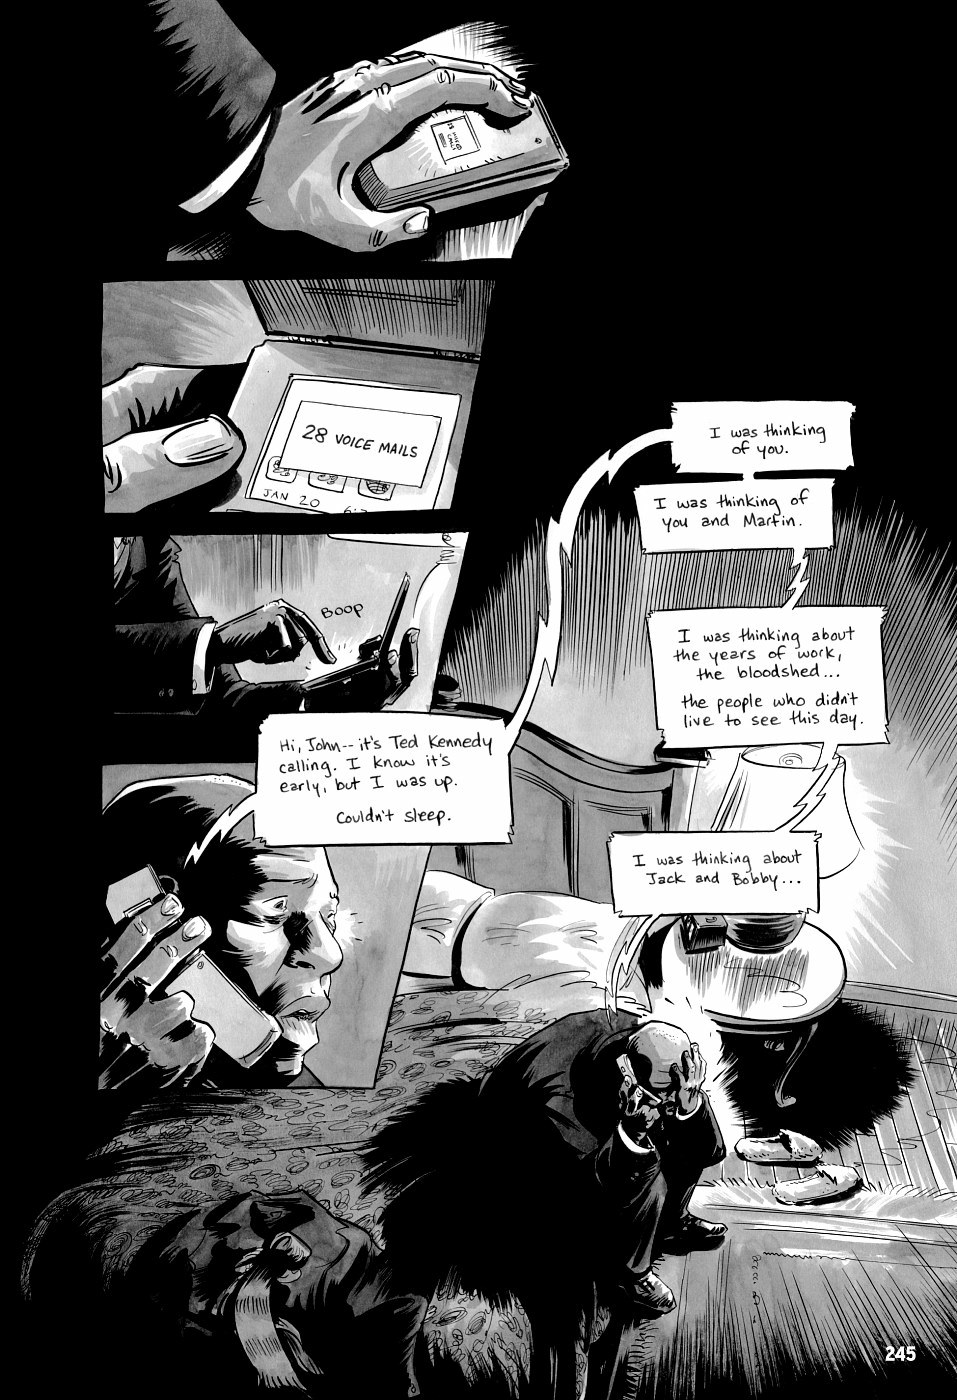 page 245 of march book three graphic novel